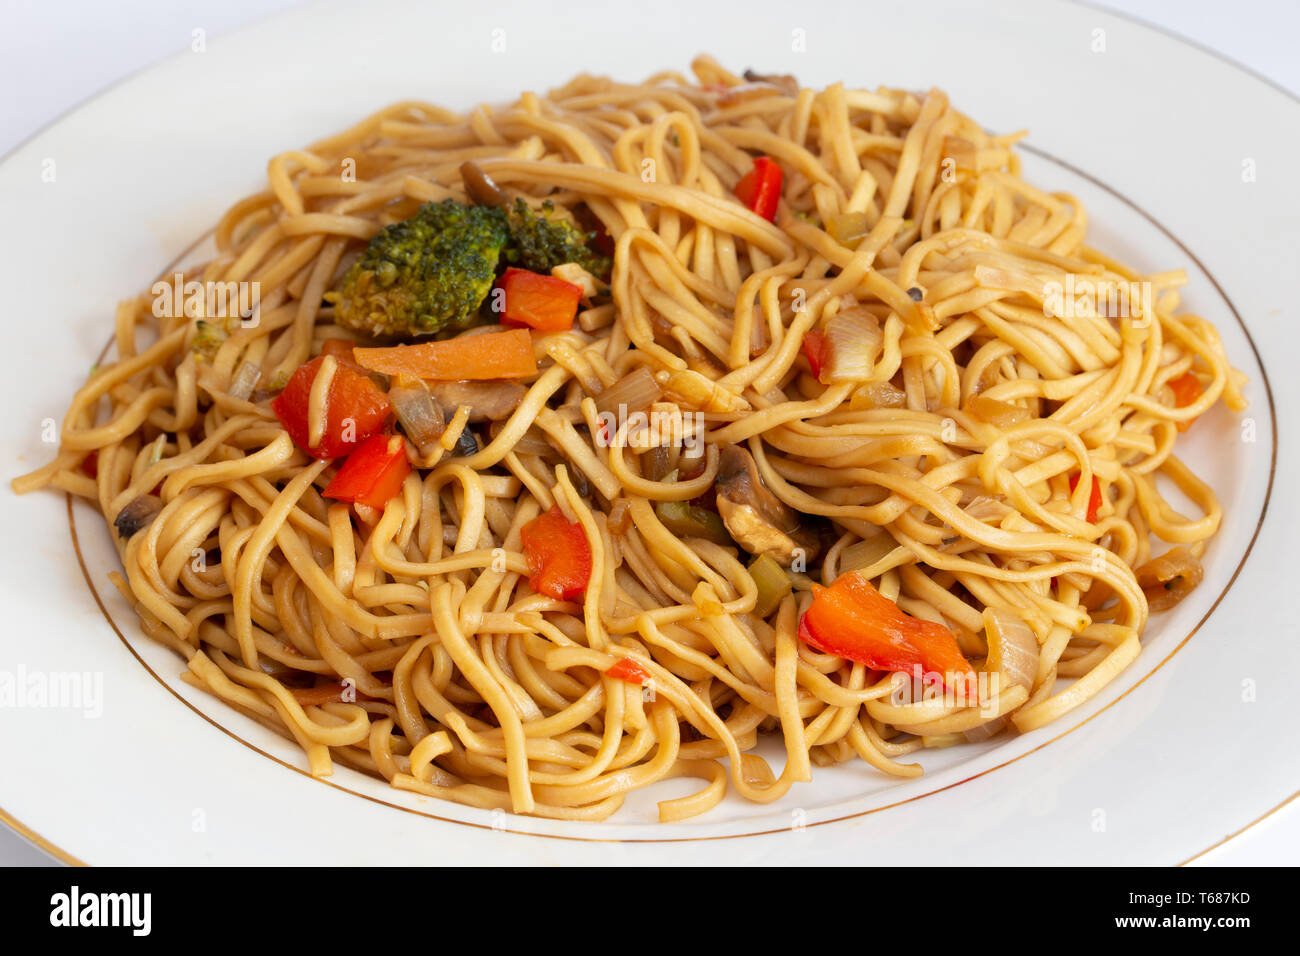 A meal of vegetable noodles, in the Asian style Stock Photo